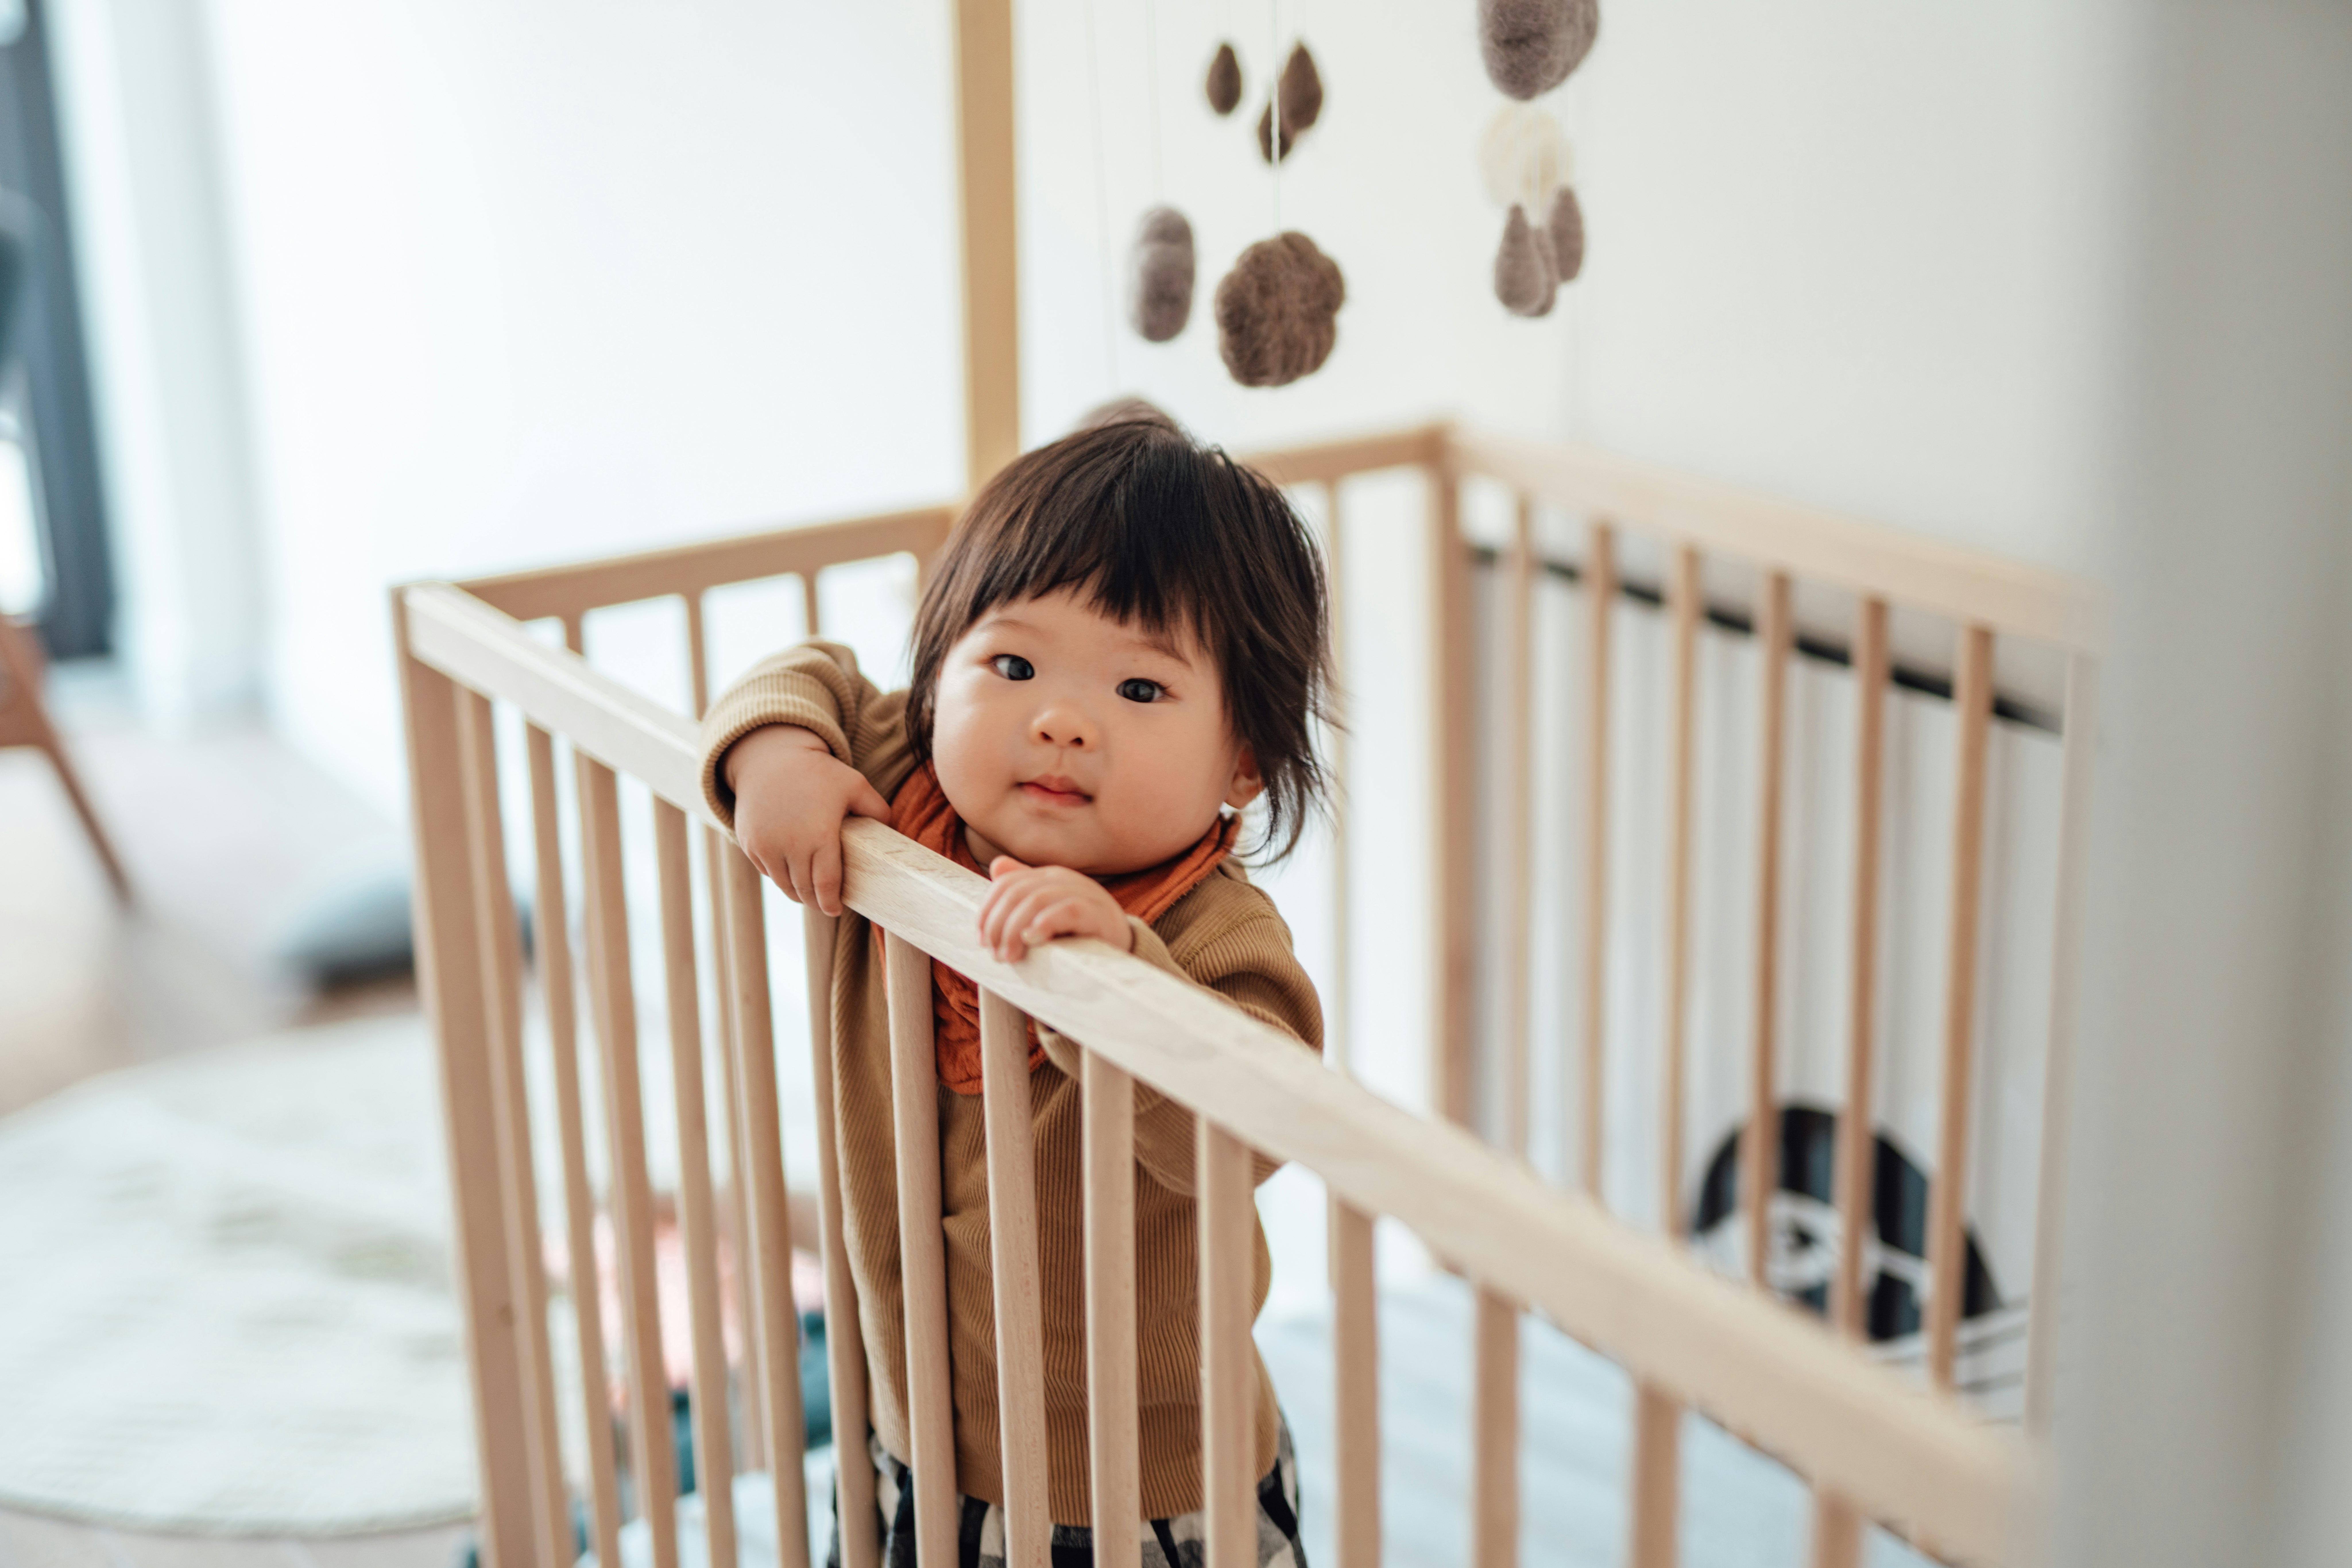 Growth Spurts & Baby Growth Spurts — What They Are & What To Do